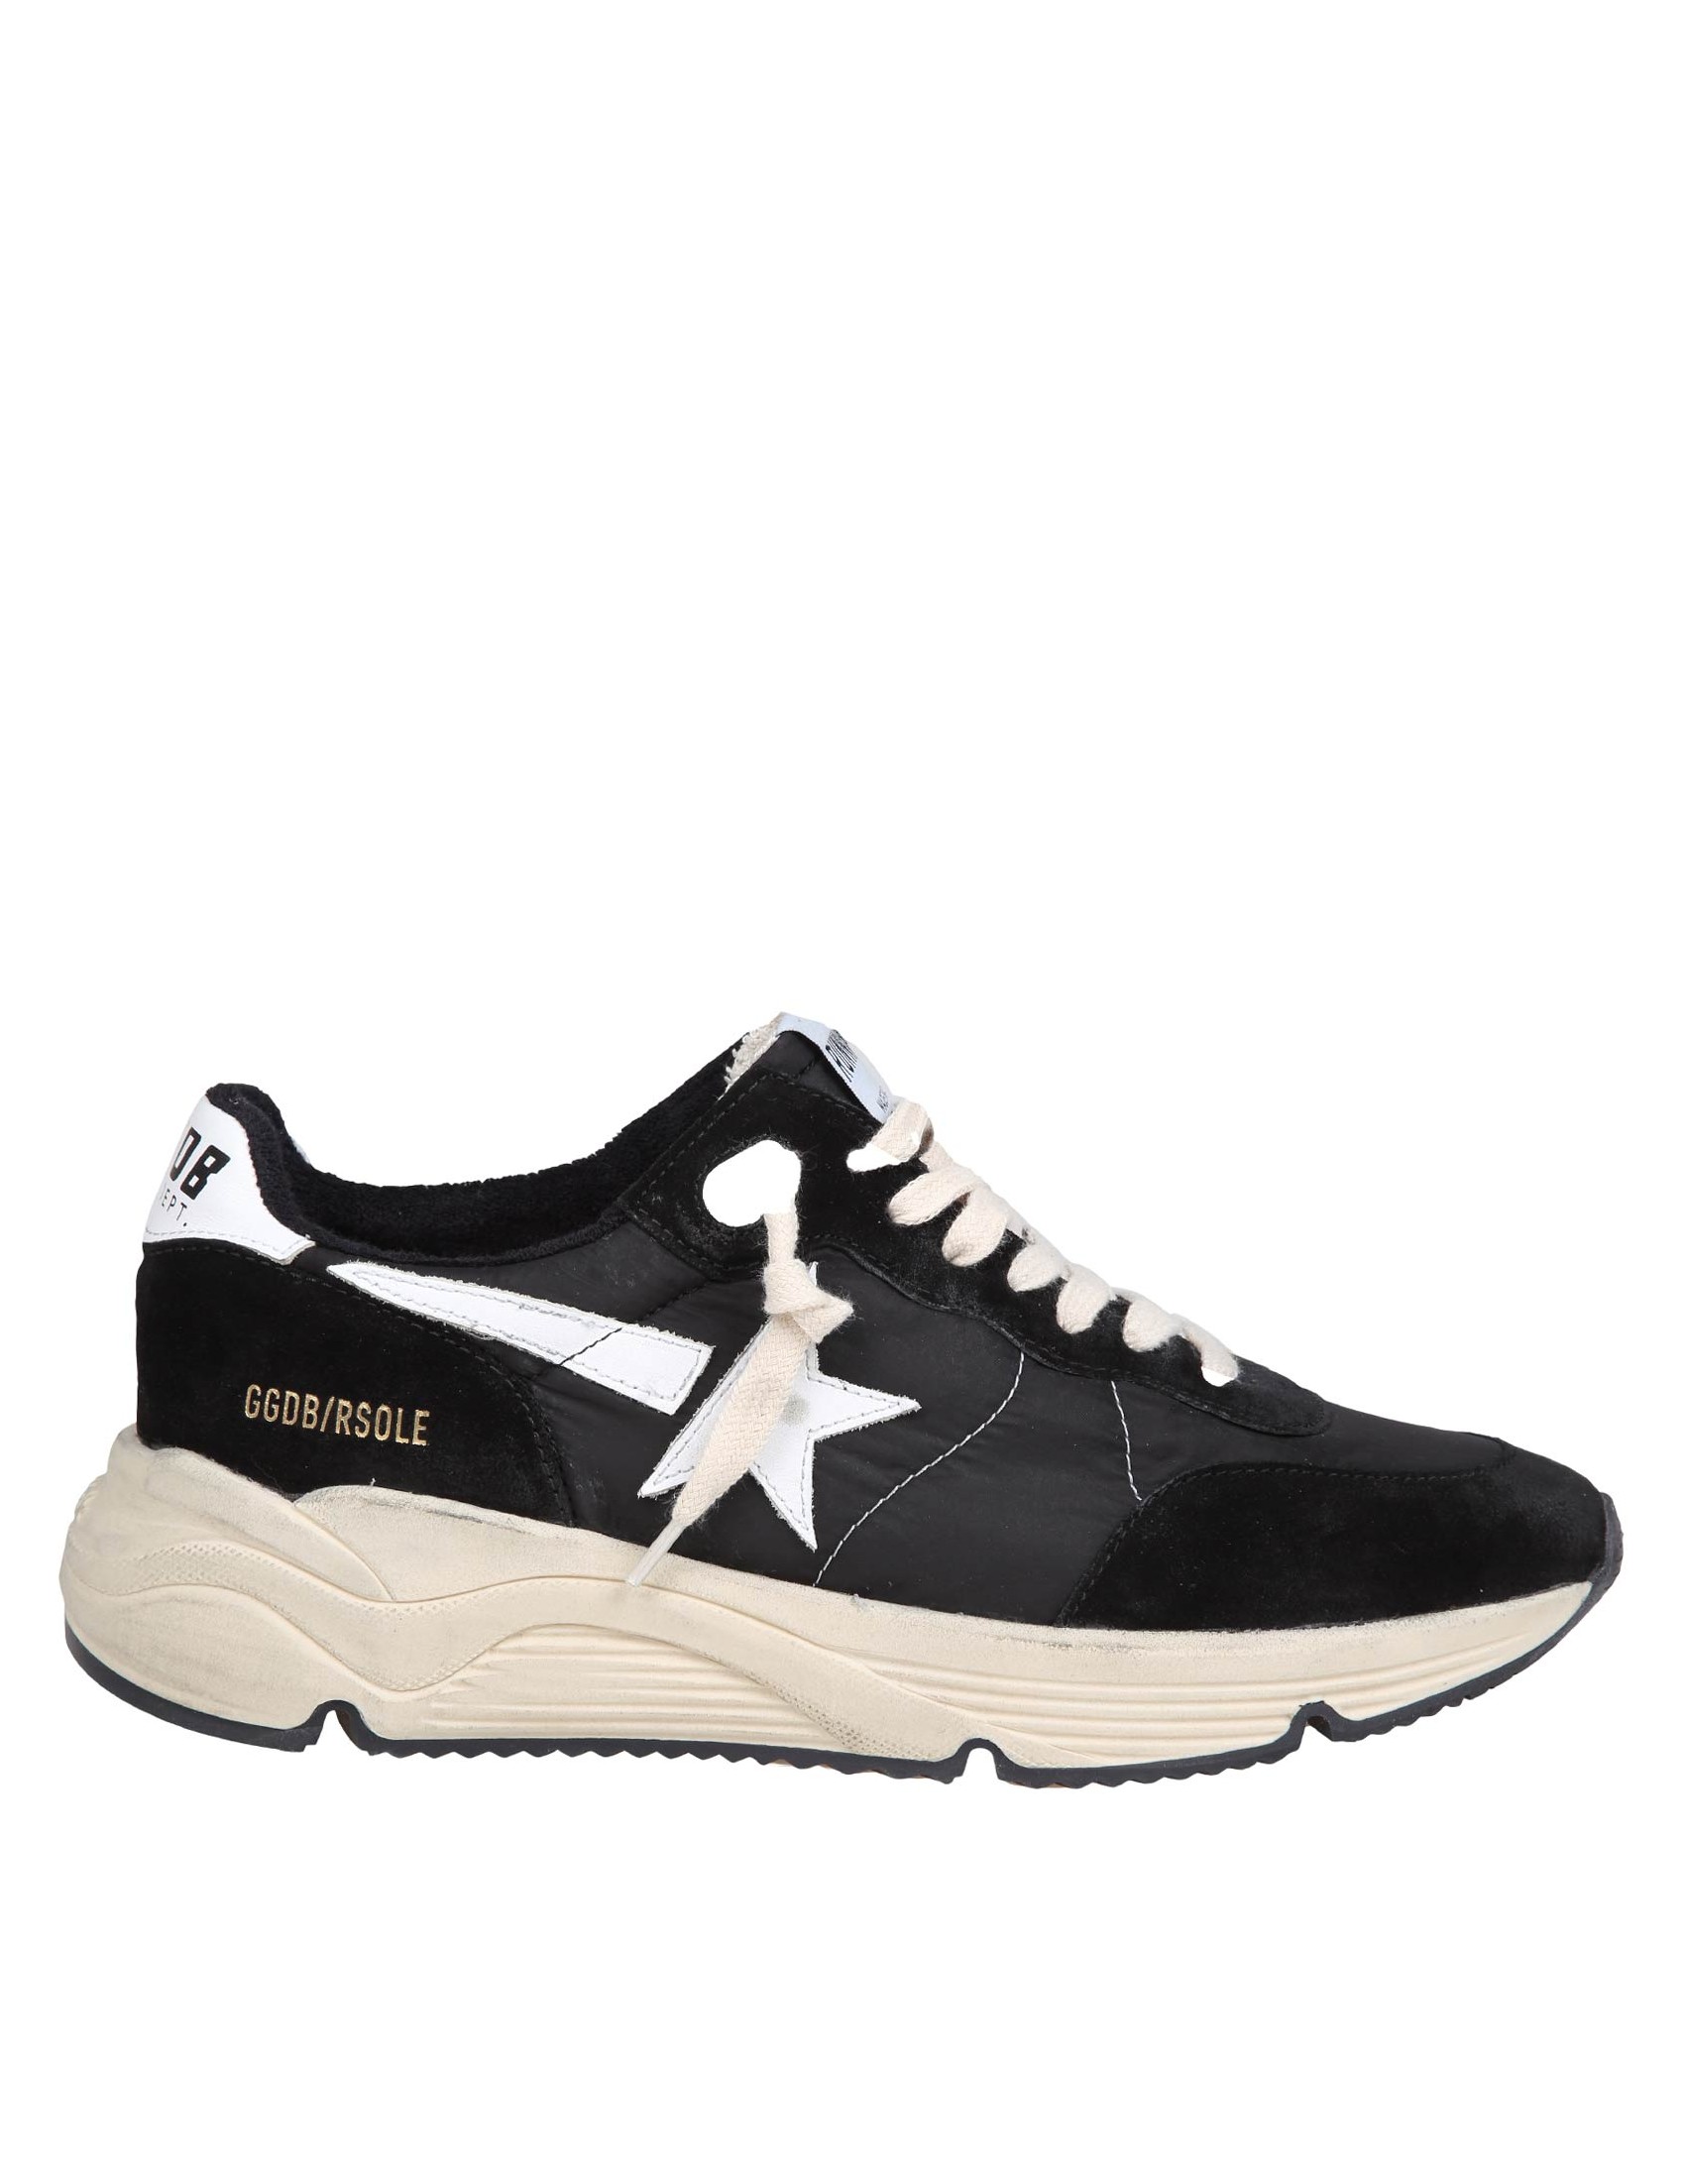 GOLDEN GOOSE RUNNING SUN SNEAKERS IN SUEDE COLOR BLACK/WHITE